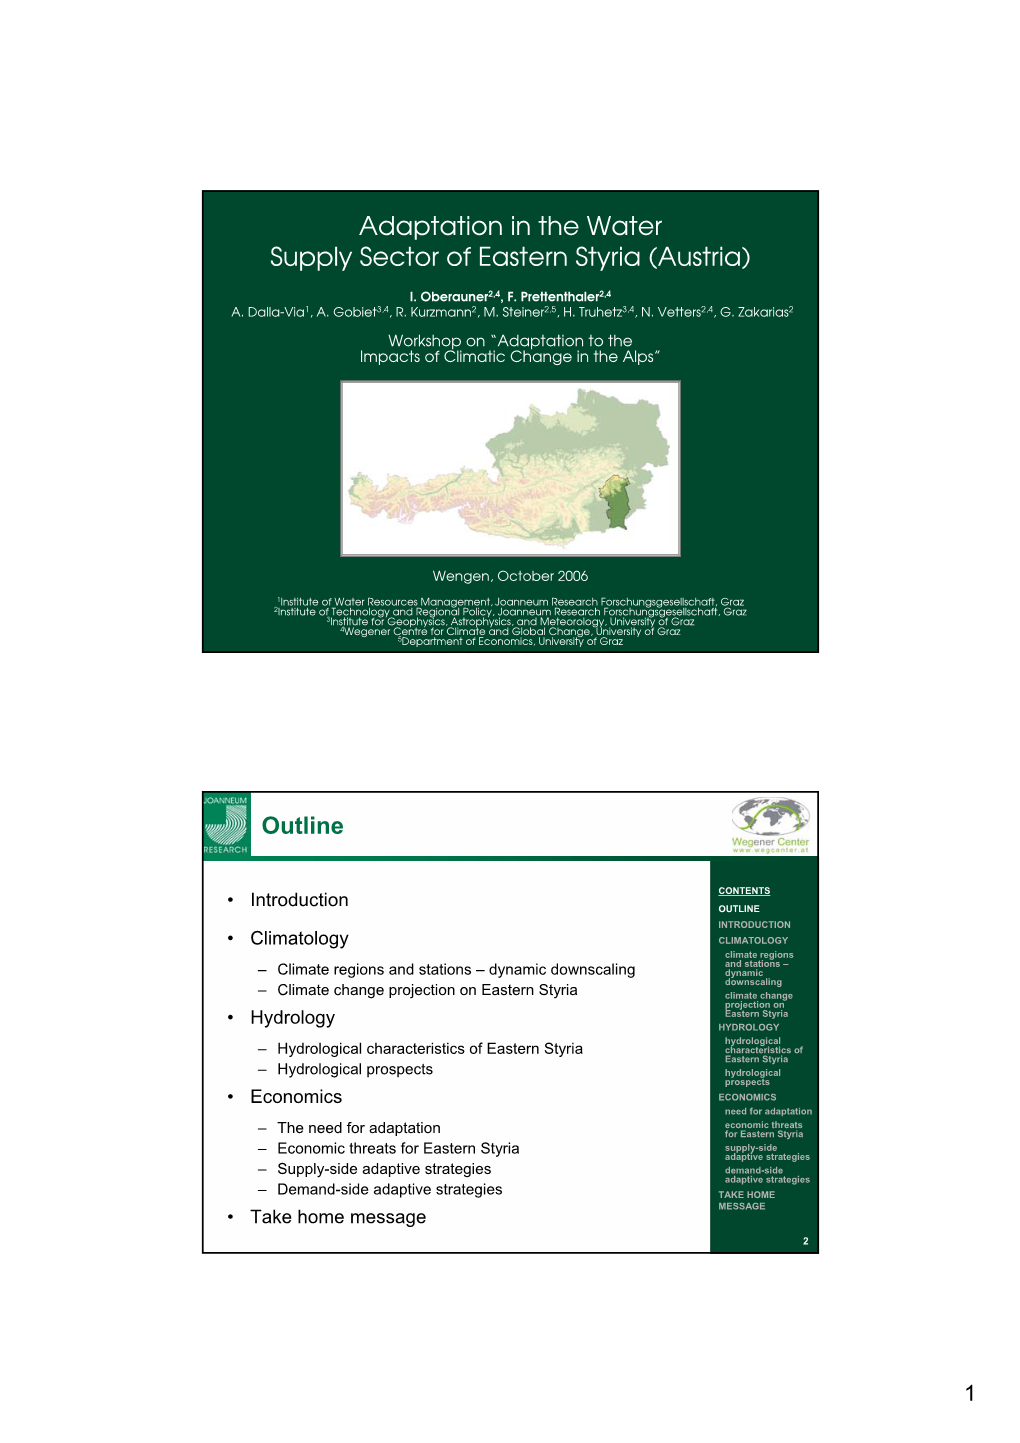 Adaptation in the Water Supply Sector of Eastern Styria (Austria)